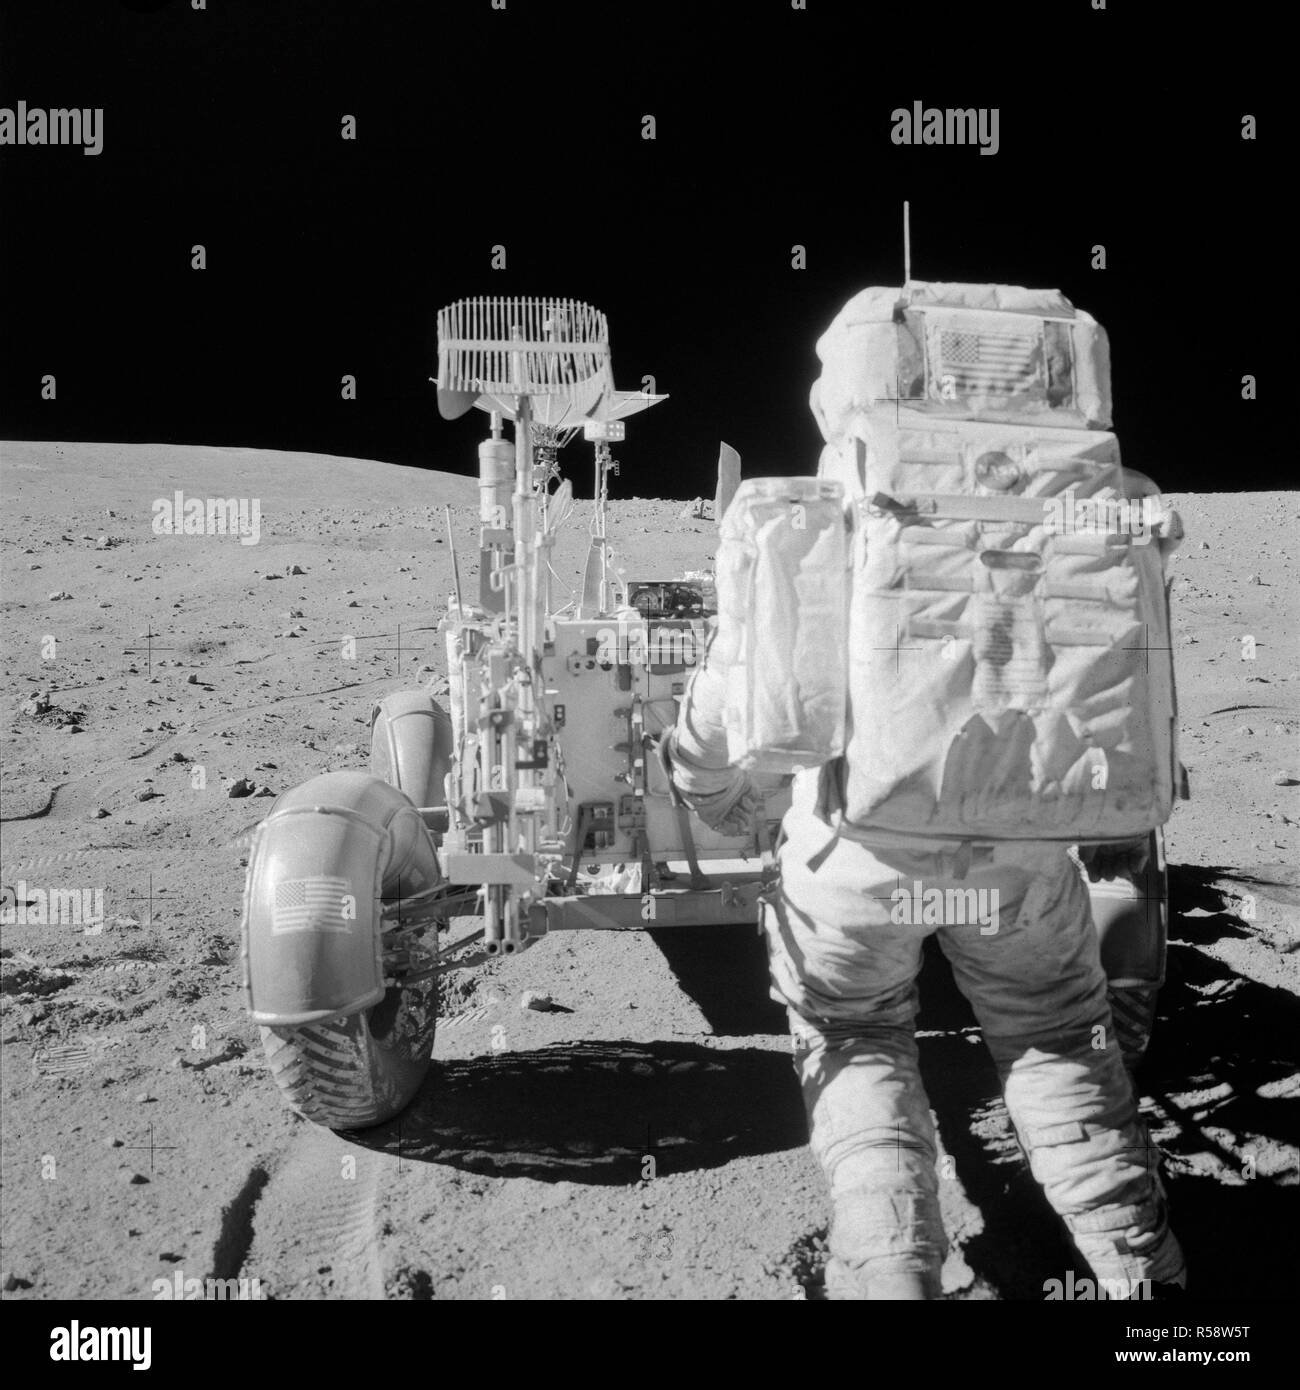 (22 April 1972) --- Astronaut John W. Young, commander of the Apollo 16 lunar landing mission, reaches for tools in the Apollo Lunar Hand Tool Carrier at the aft end of the Lunar Roving Vehicle (LRV) during the second Apollo 16 extravehicular activity (EVA) at the Descartes landing site. Stock Photo